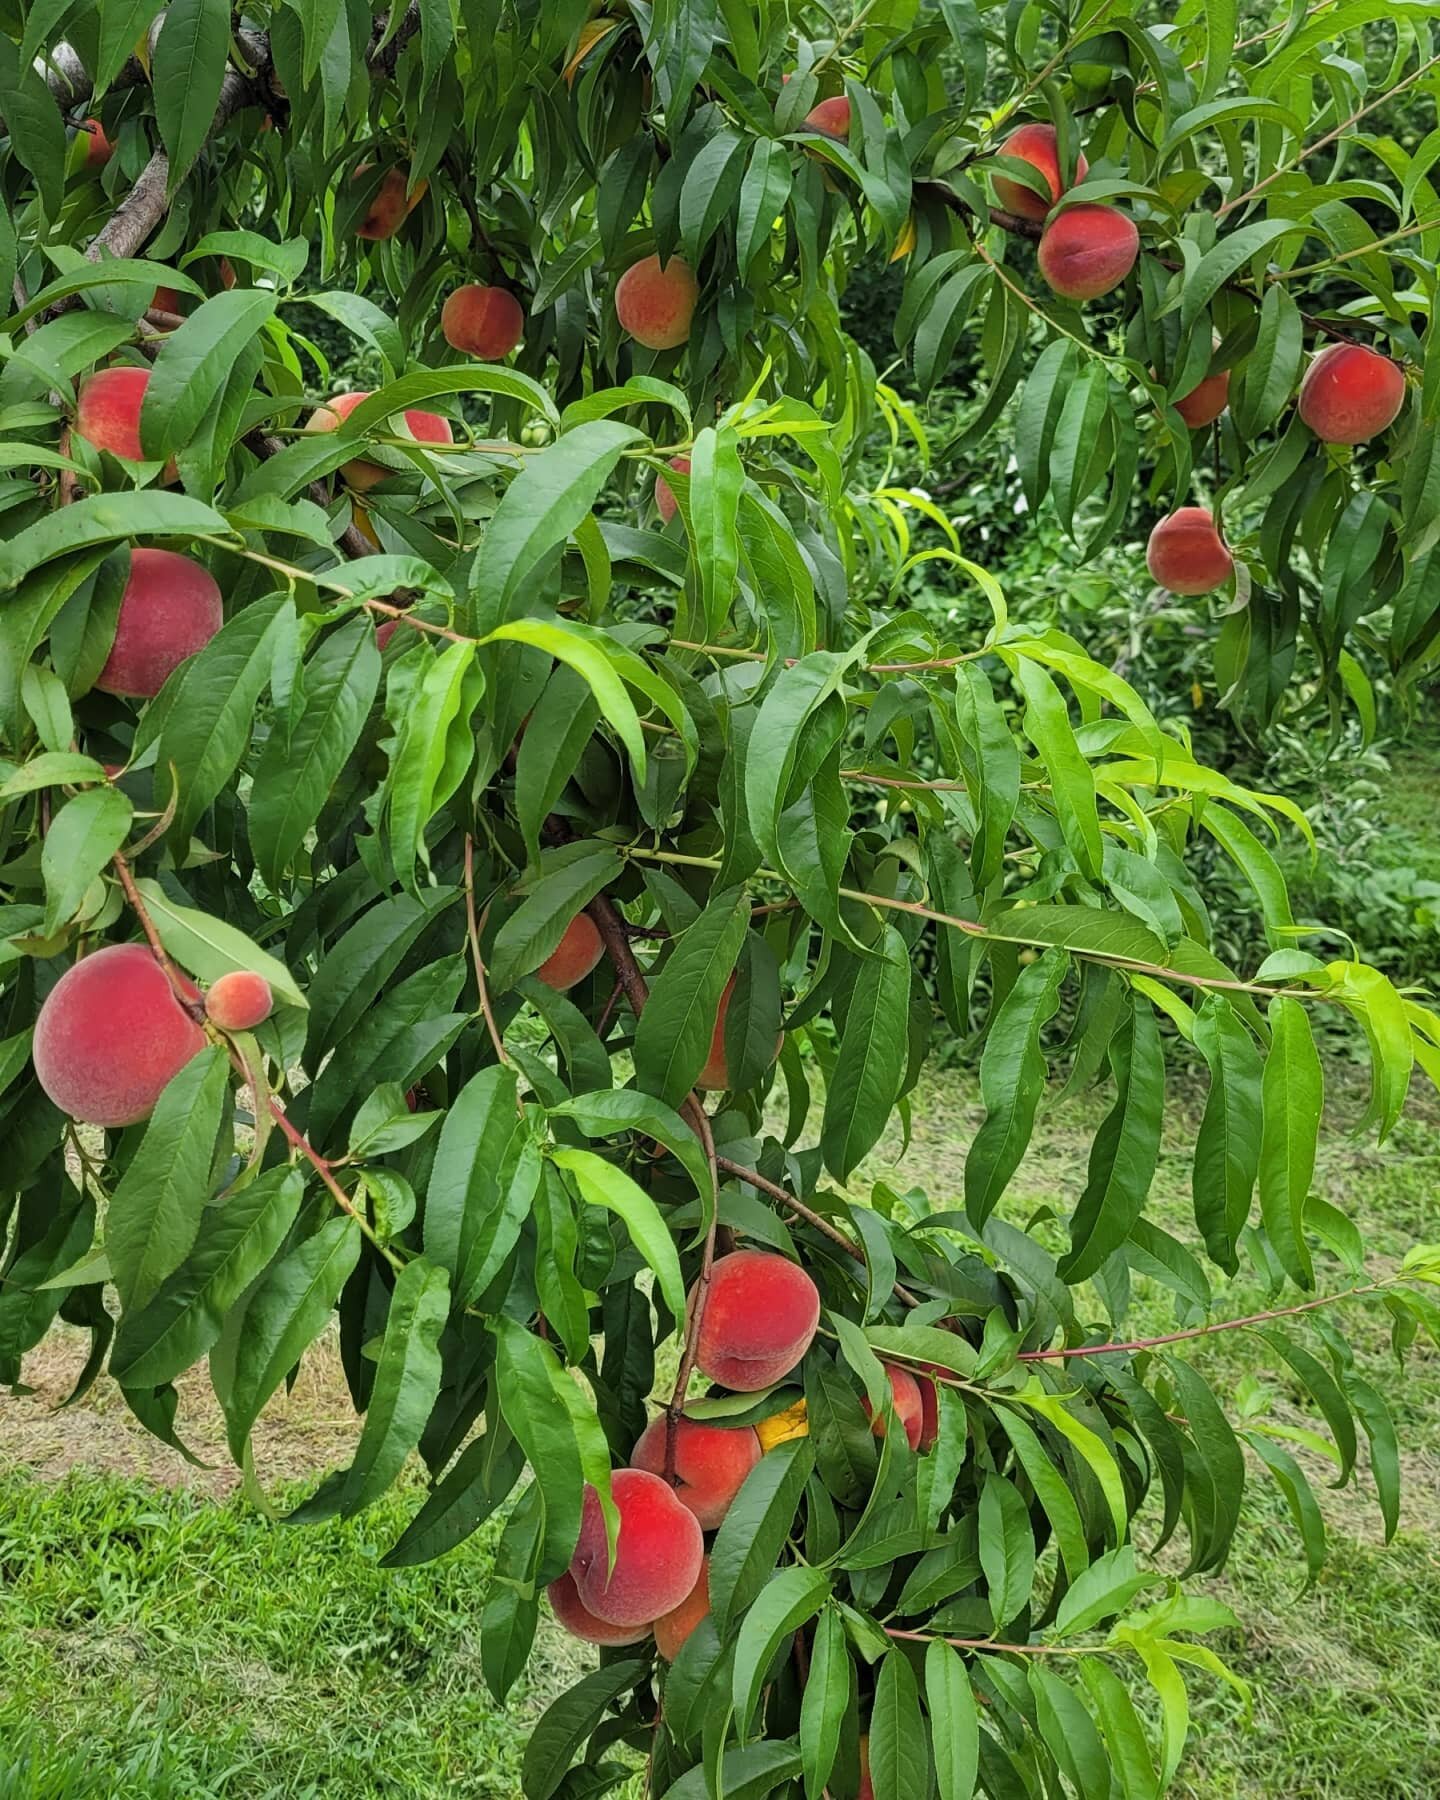 Pick your own Peaches, Blueberries and Lodi Apples!  We have everything you need to pick...except the rain boots.  Please bring sensible shoes to wear into the fields because we received a lot of rain yesterday!  Fields are open everyday except Tuesd